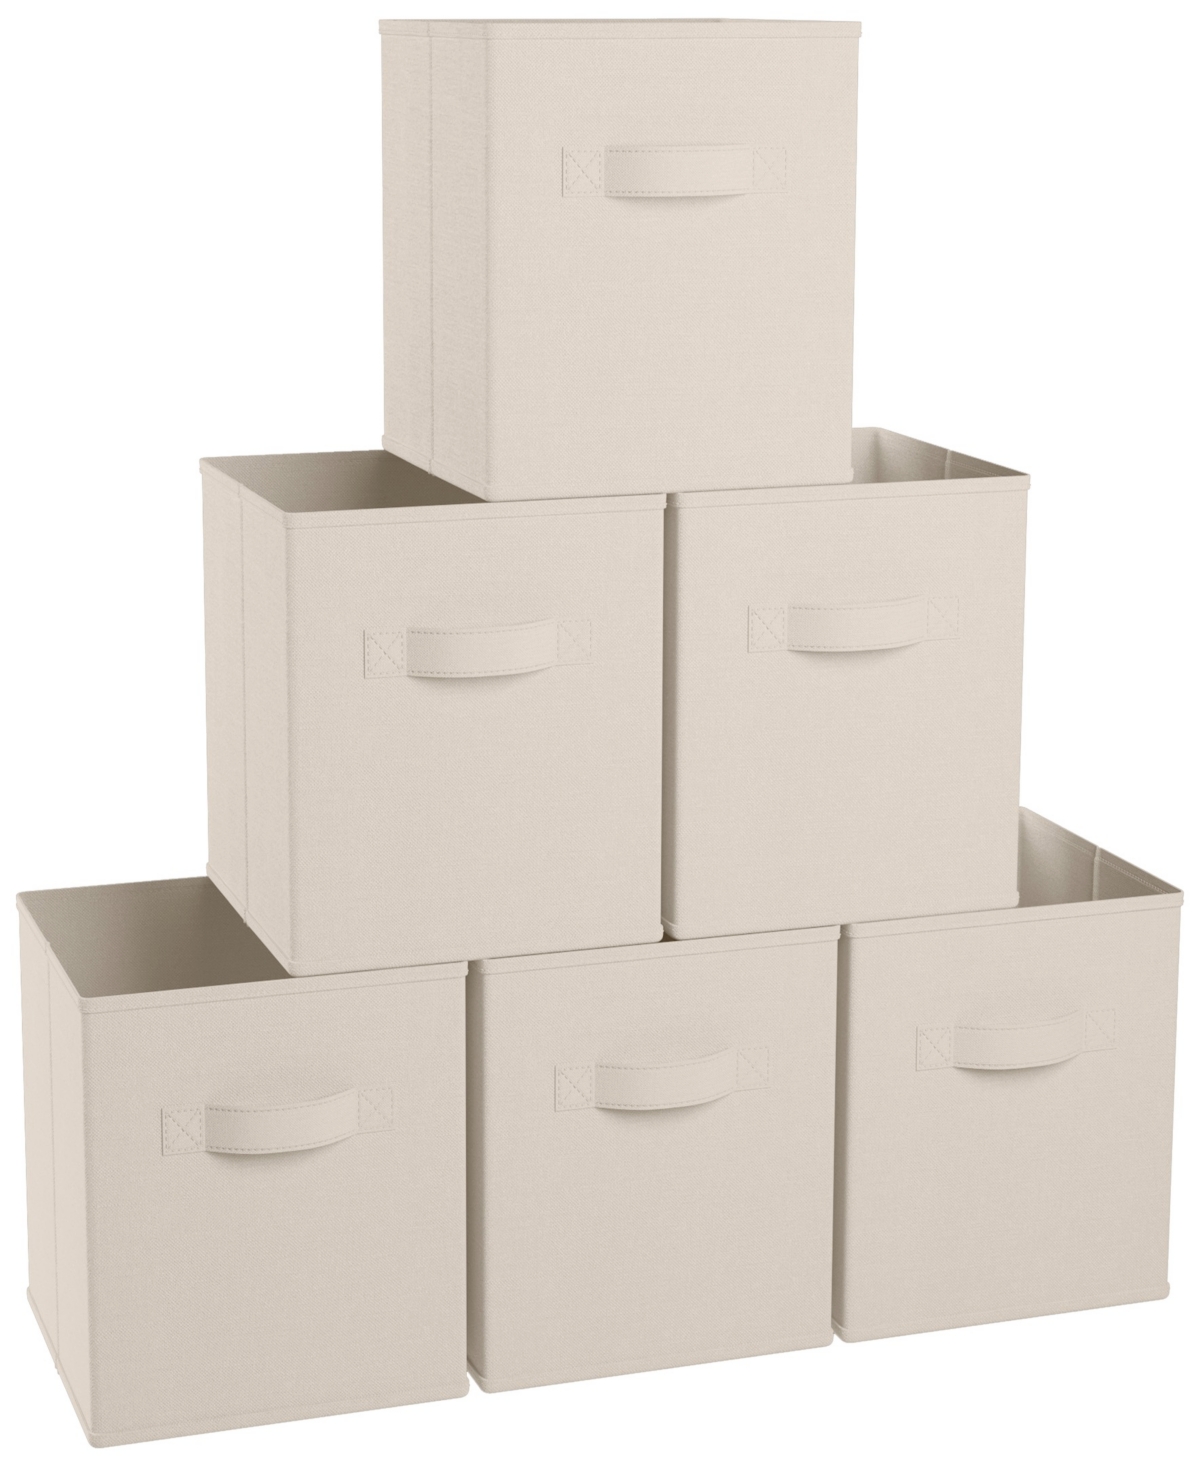 Foldable Storage Cube Bin with Dual Handles- Set of 6 - White